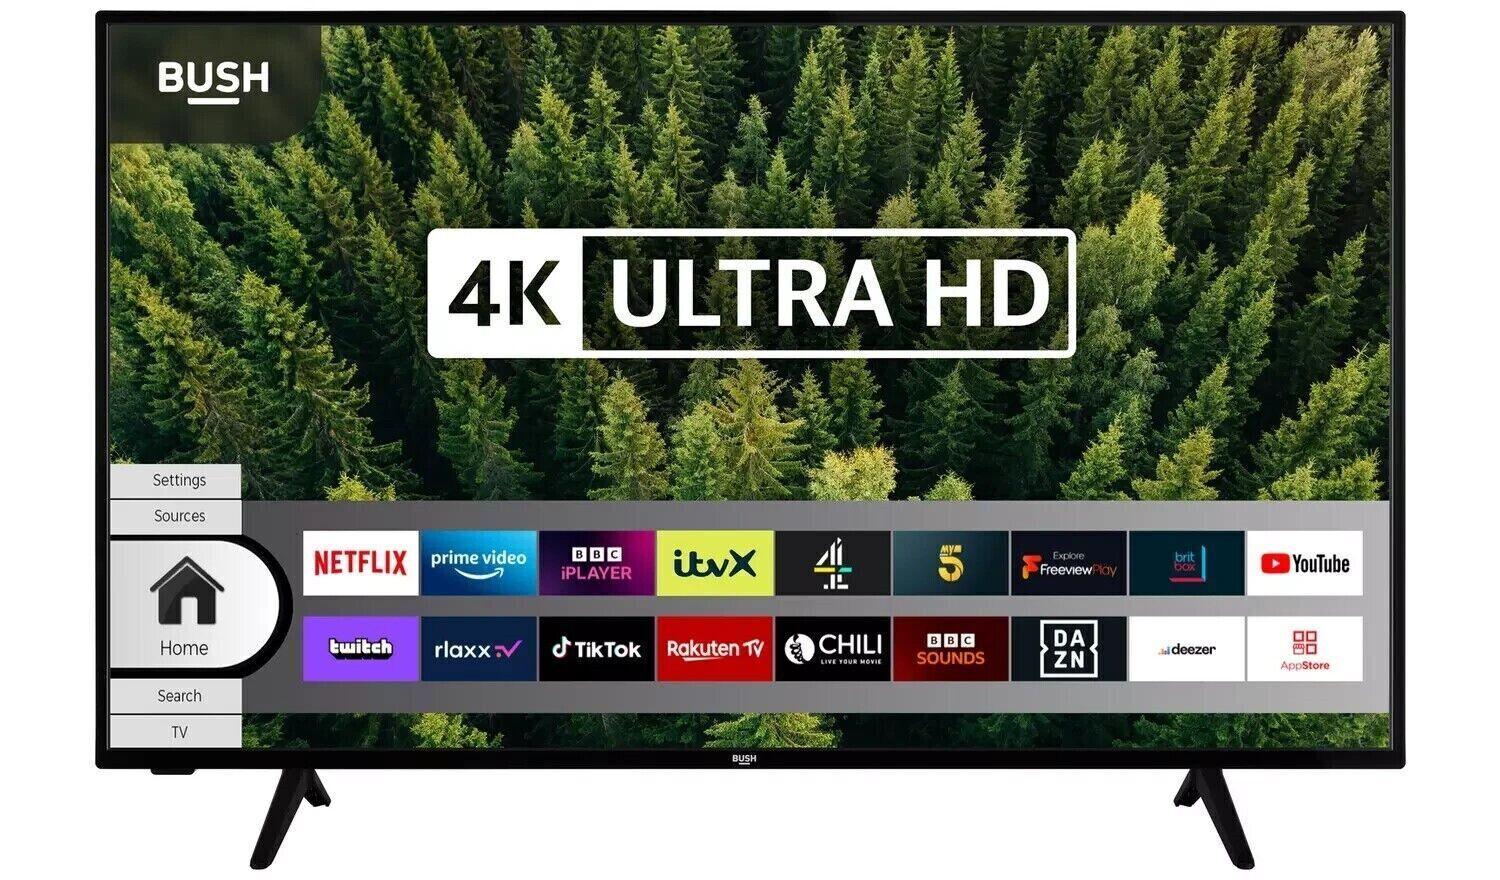 Bush 50 Inch Smart 4K UHD HDR LED Freeview TV DLED50UHDHDRS1 U COLLECTION ONLY - Smart Clear Vision